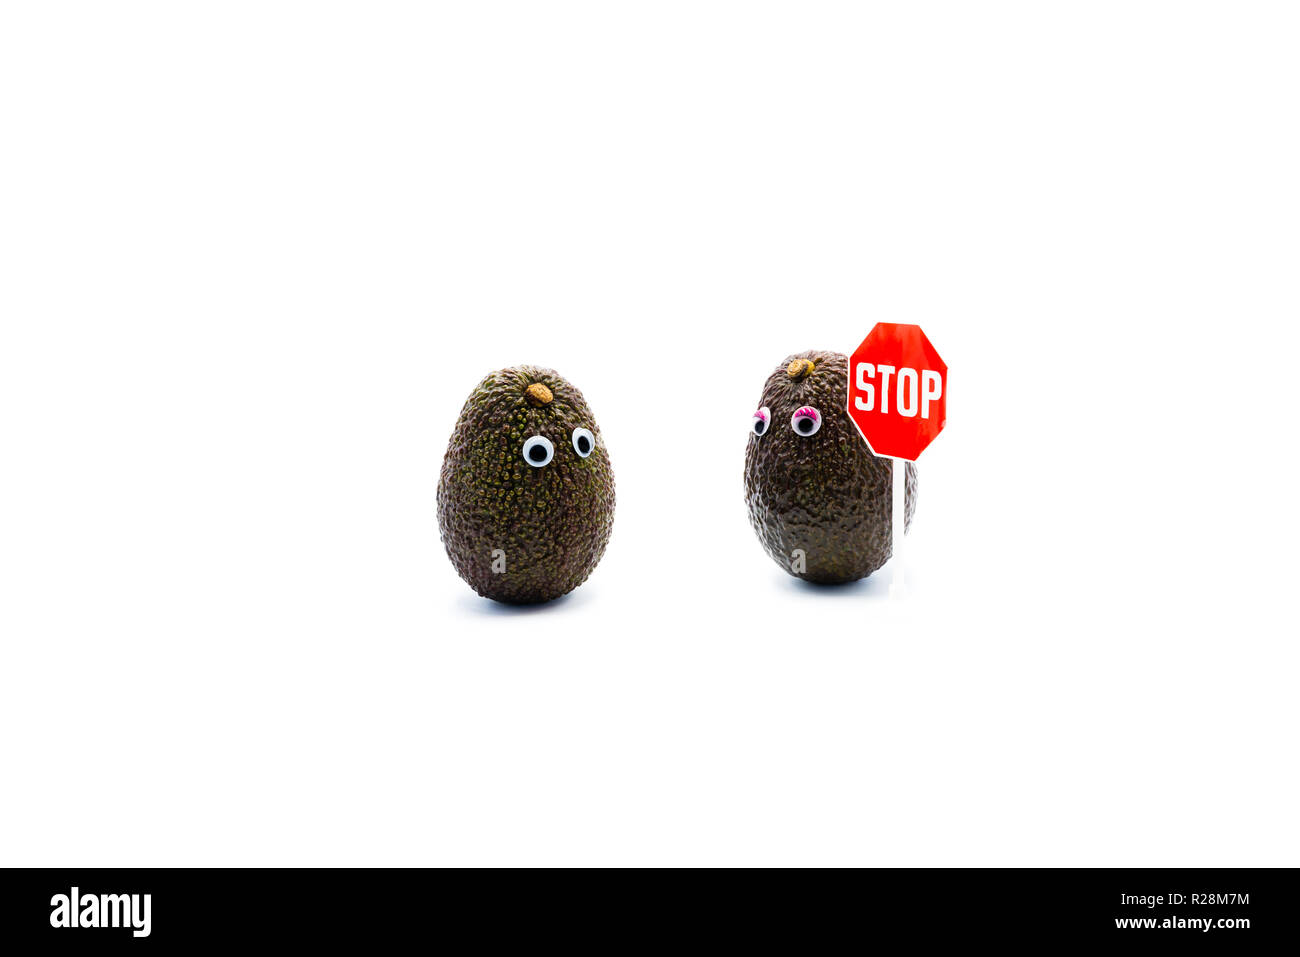 Romantic avocados couple with googly eyes as man and woman, STOP traffic sign, funny food concept for creative projects. Stock Photo